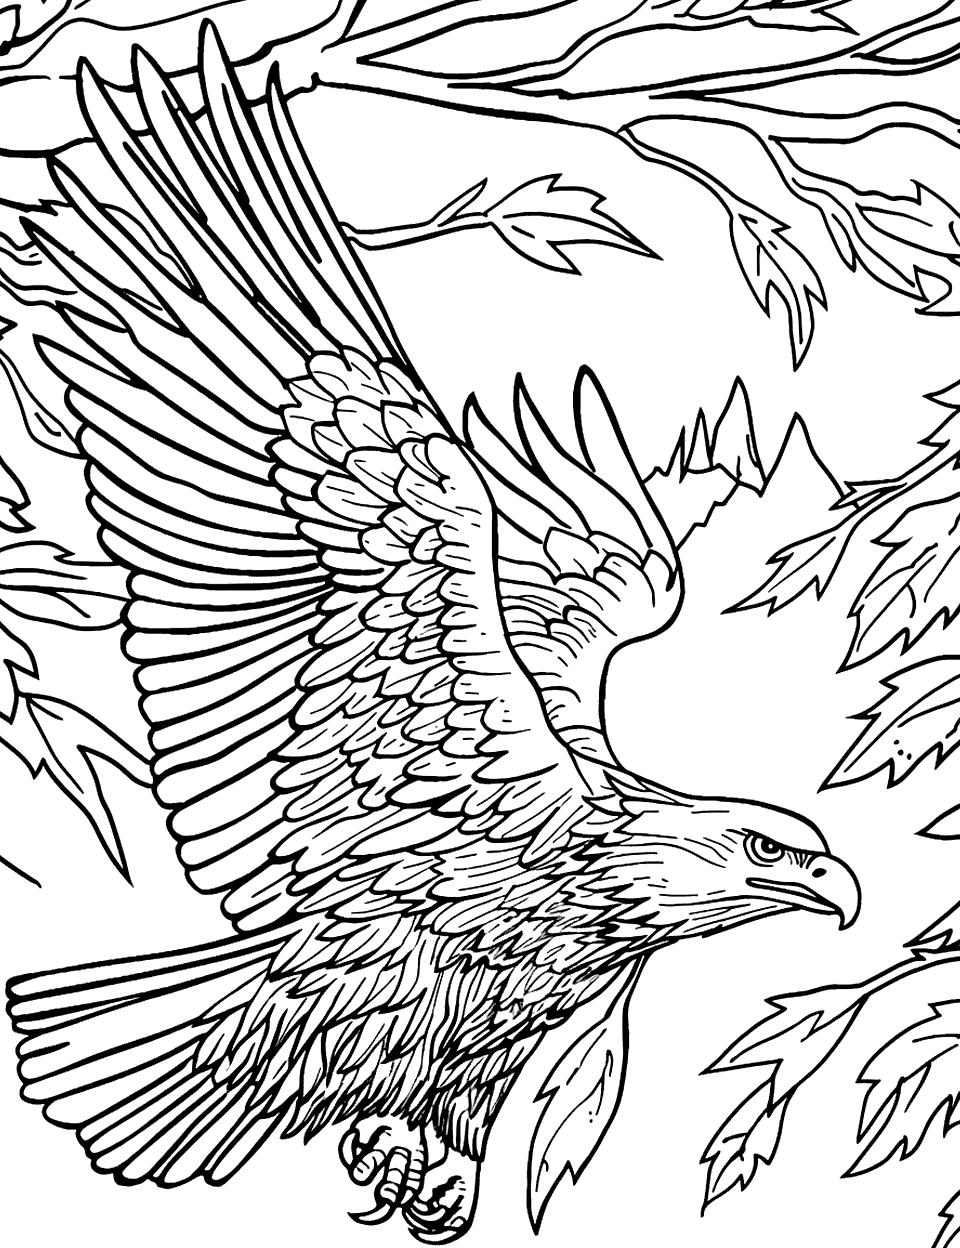 Eagle and the Autumn Leaves Coloring Page - An eagle flies through a forest of autumn trees.